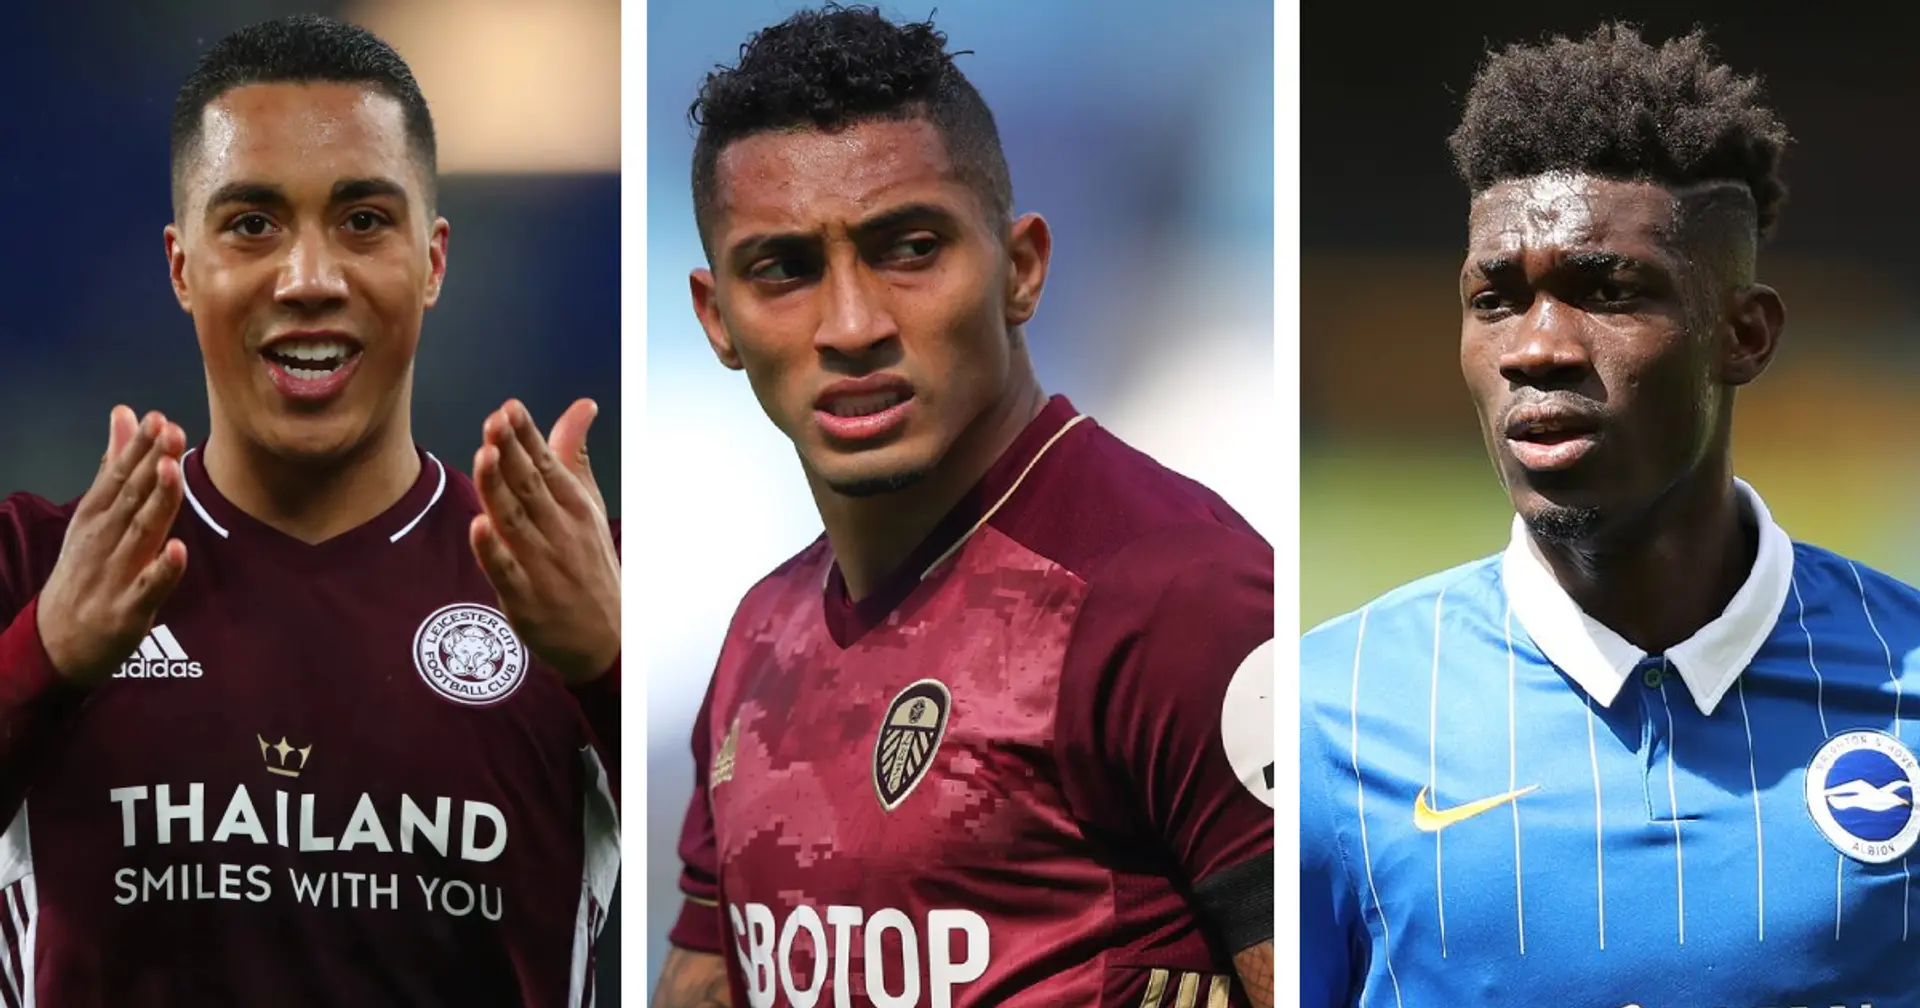 Raphinha links, Bissouma and Tielemans update: Liverpool transfer round-up with probability ratings